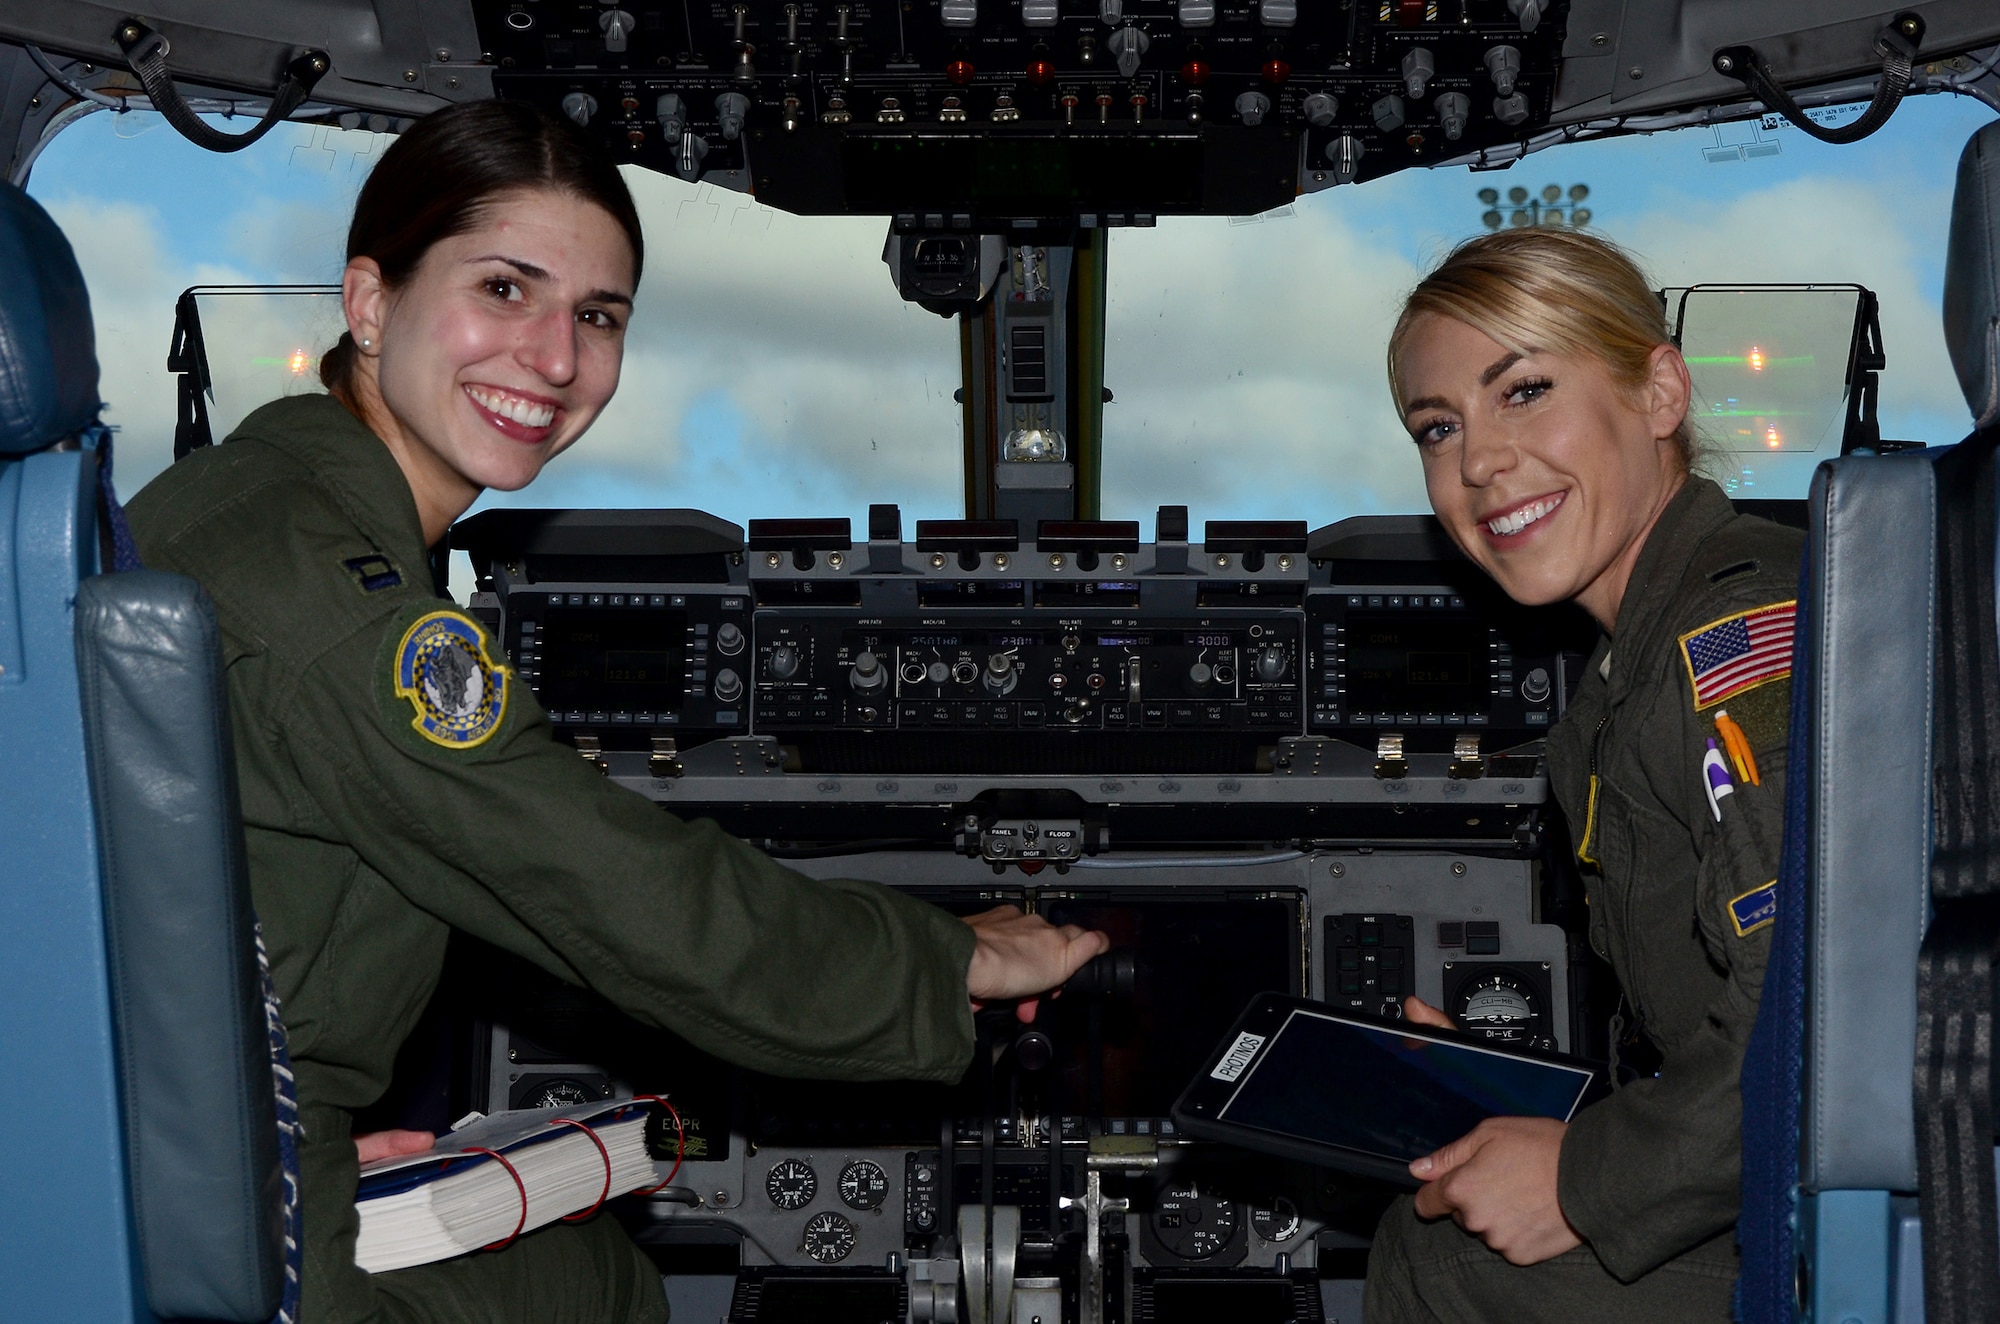 Capt. Maria Duffy and 1st Lt. Cecilia Photinos, both C-17 pilots with the 89th Airlift Squadron, participated in the 2019 The Sky’s No Limit – Girls Fly Too! event held at the Abbotsford International Airport, Abbotsford, British Columbia, Canada Oct. 5-6, 2019.